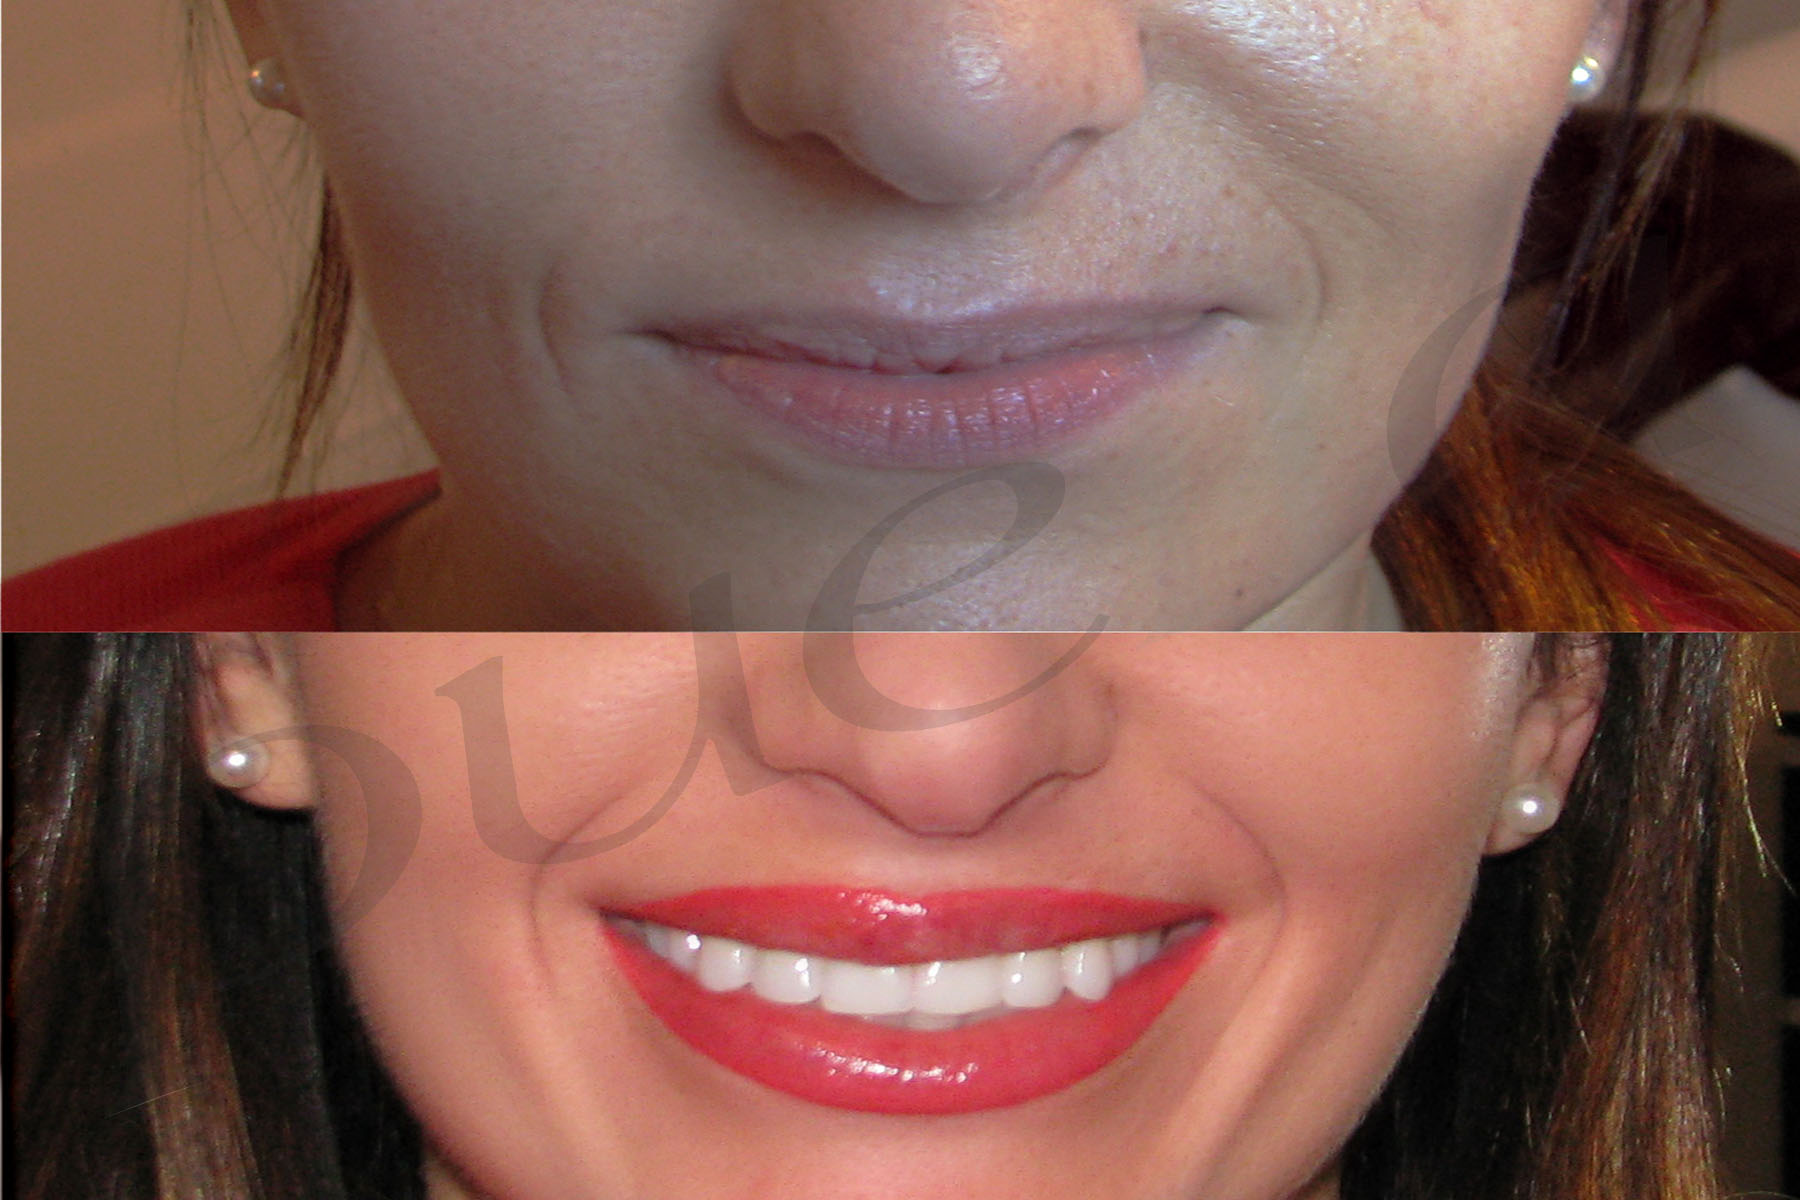 Permanent makeup by Puella Beauty - lips before and after image